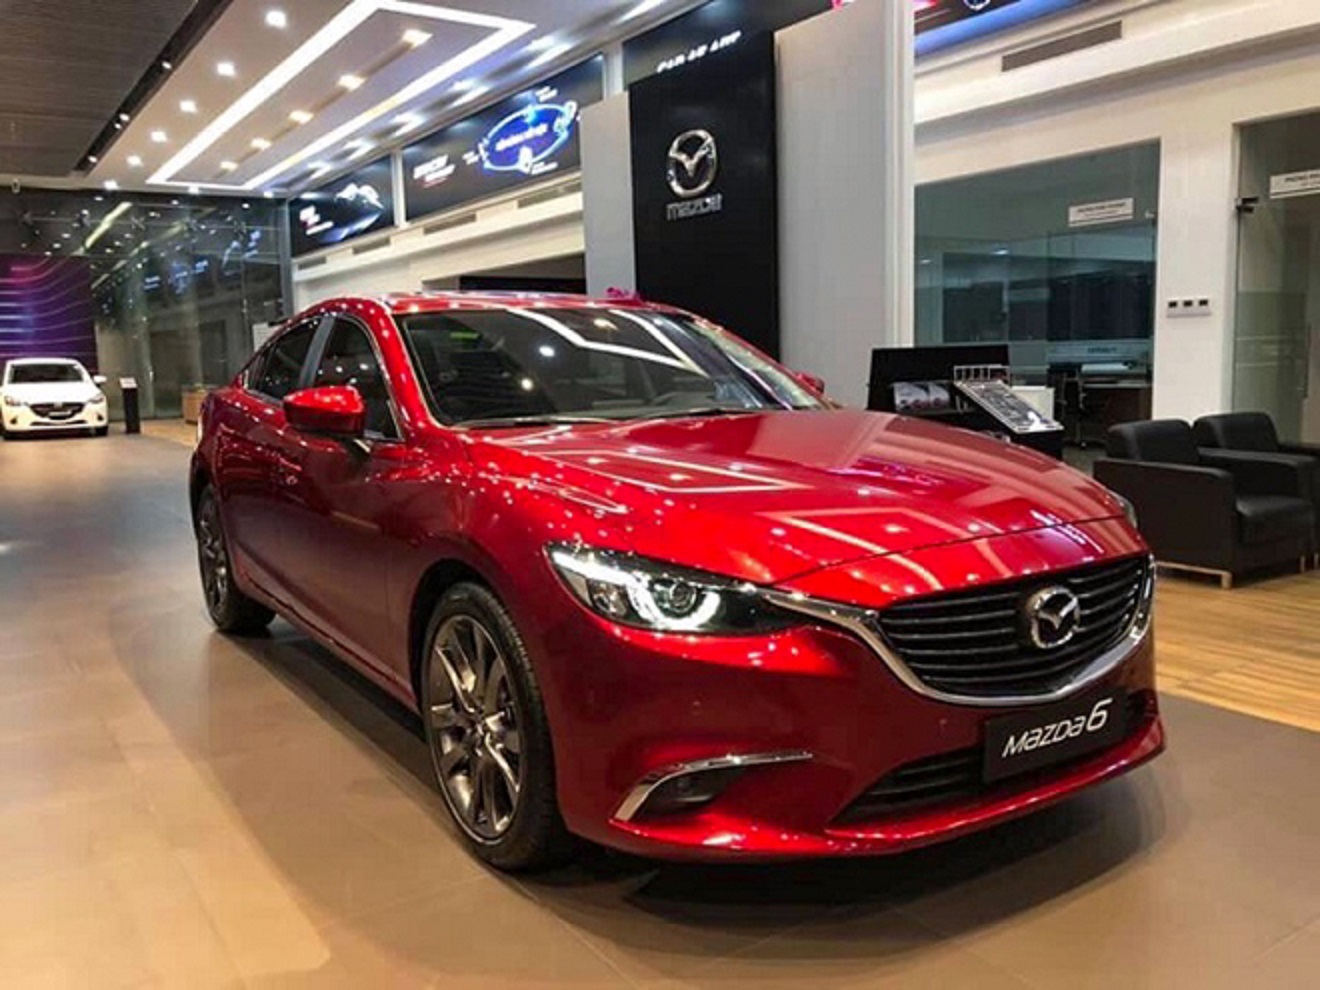 Competitor Toyota Camry shocked by up to 100 million VND at the dealer, surprising Vietnamese customers